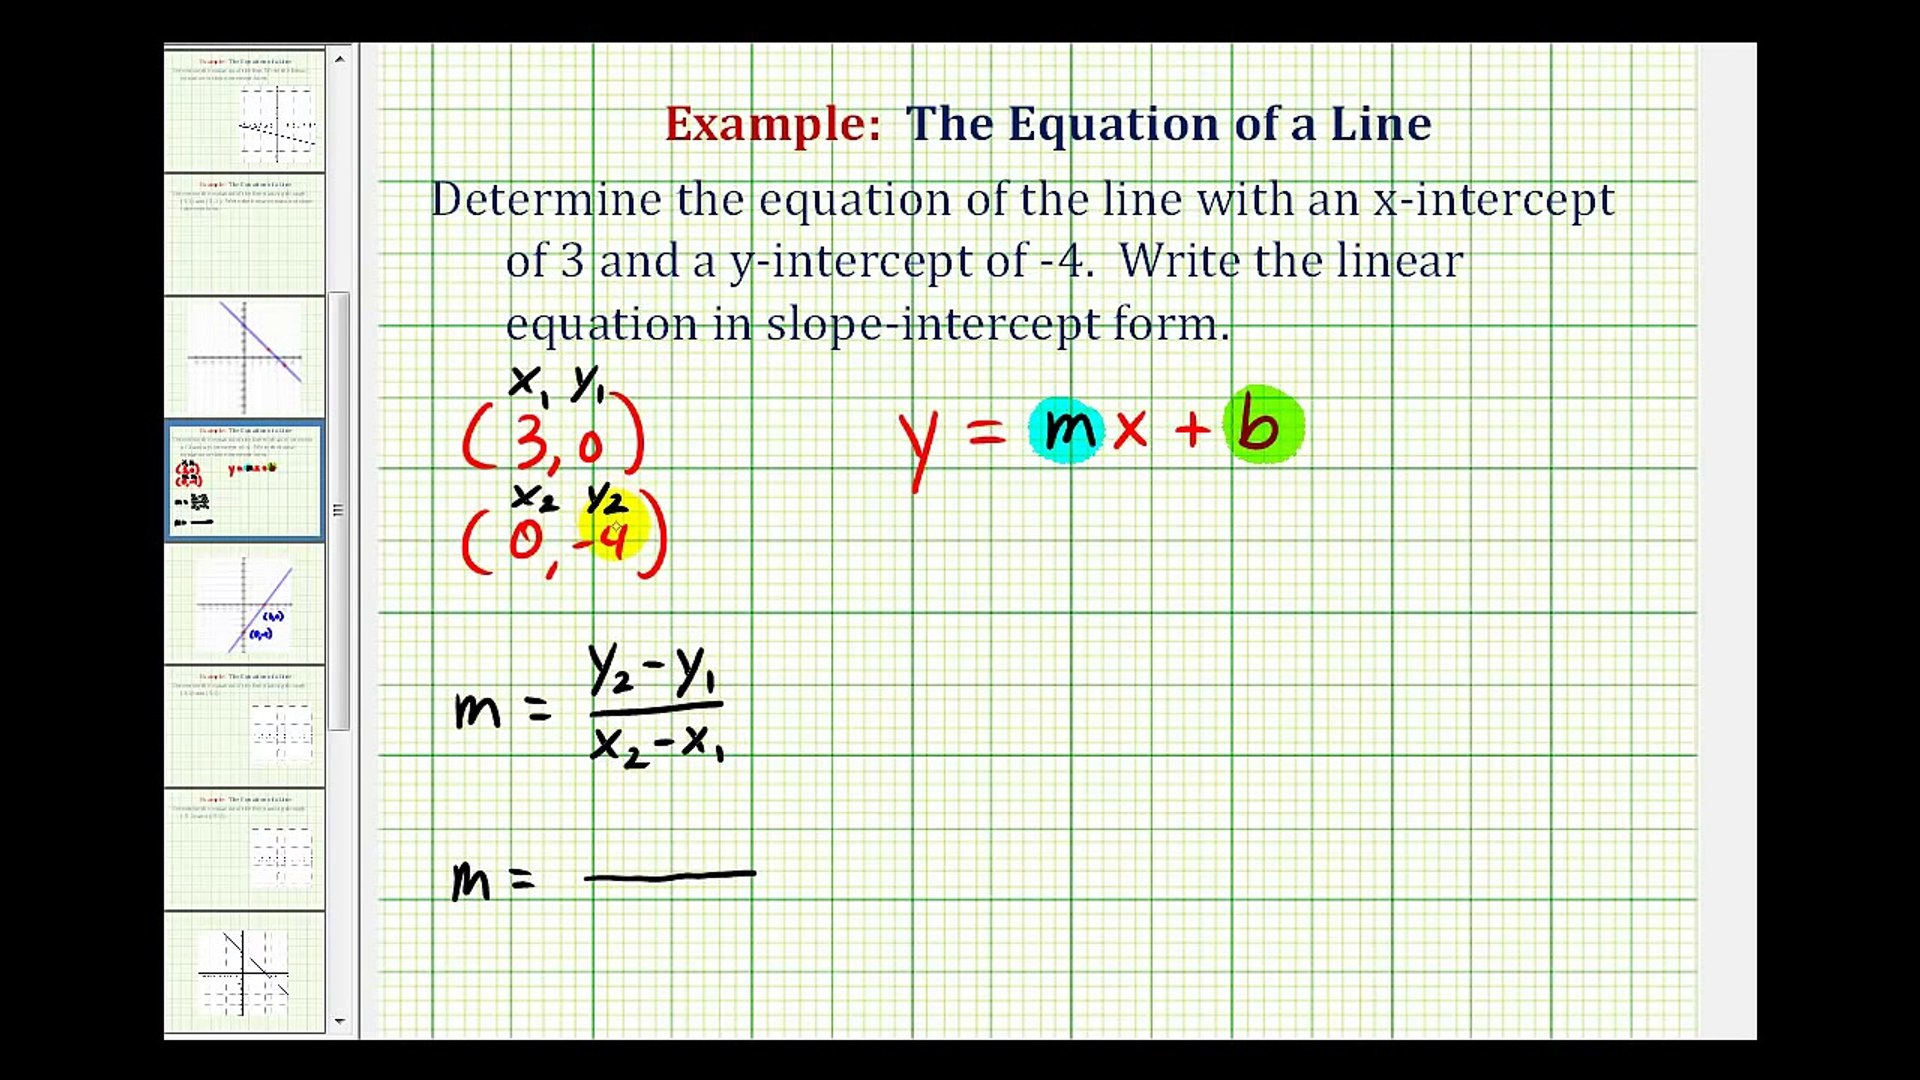 Ex: Find the Equation of a Line in Slope Intercept Form Given the